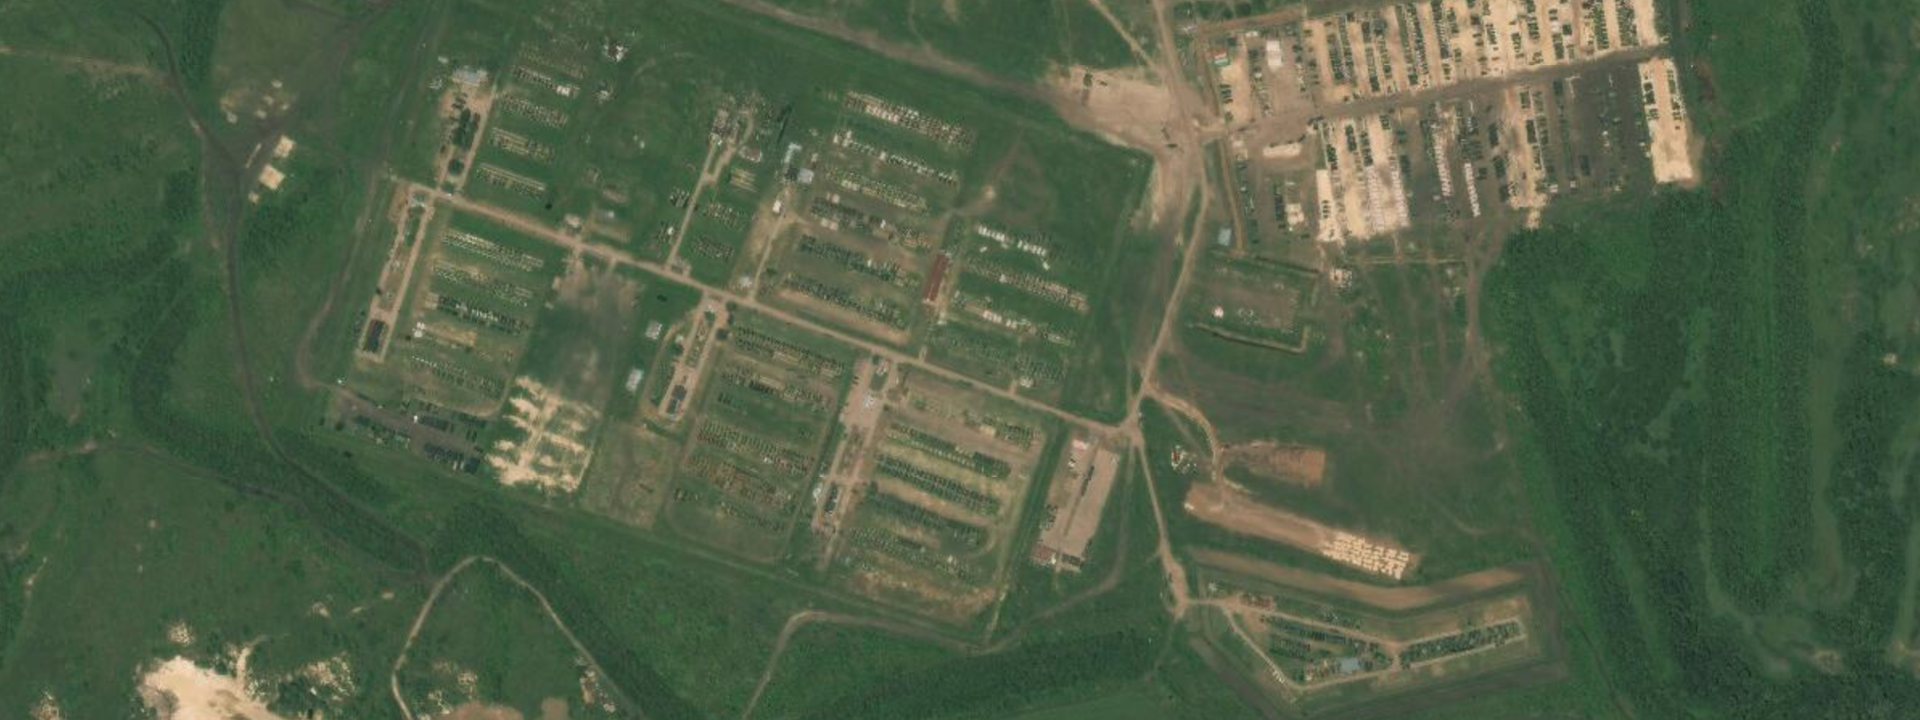 Images and Activity: Russian Military Bases on Ukraine’s Eastern Border